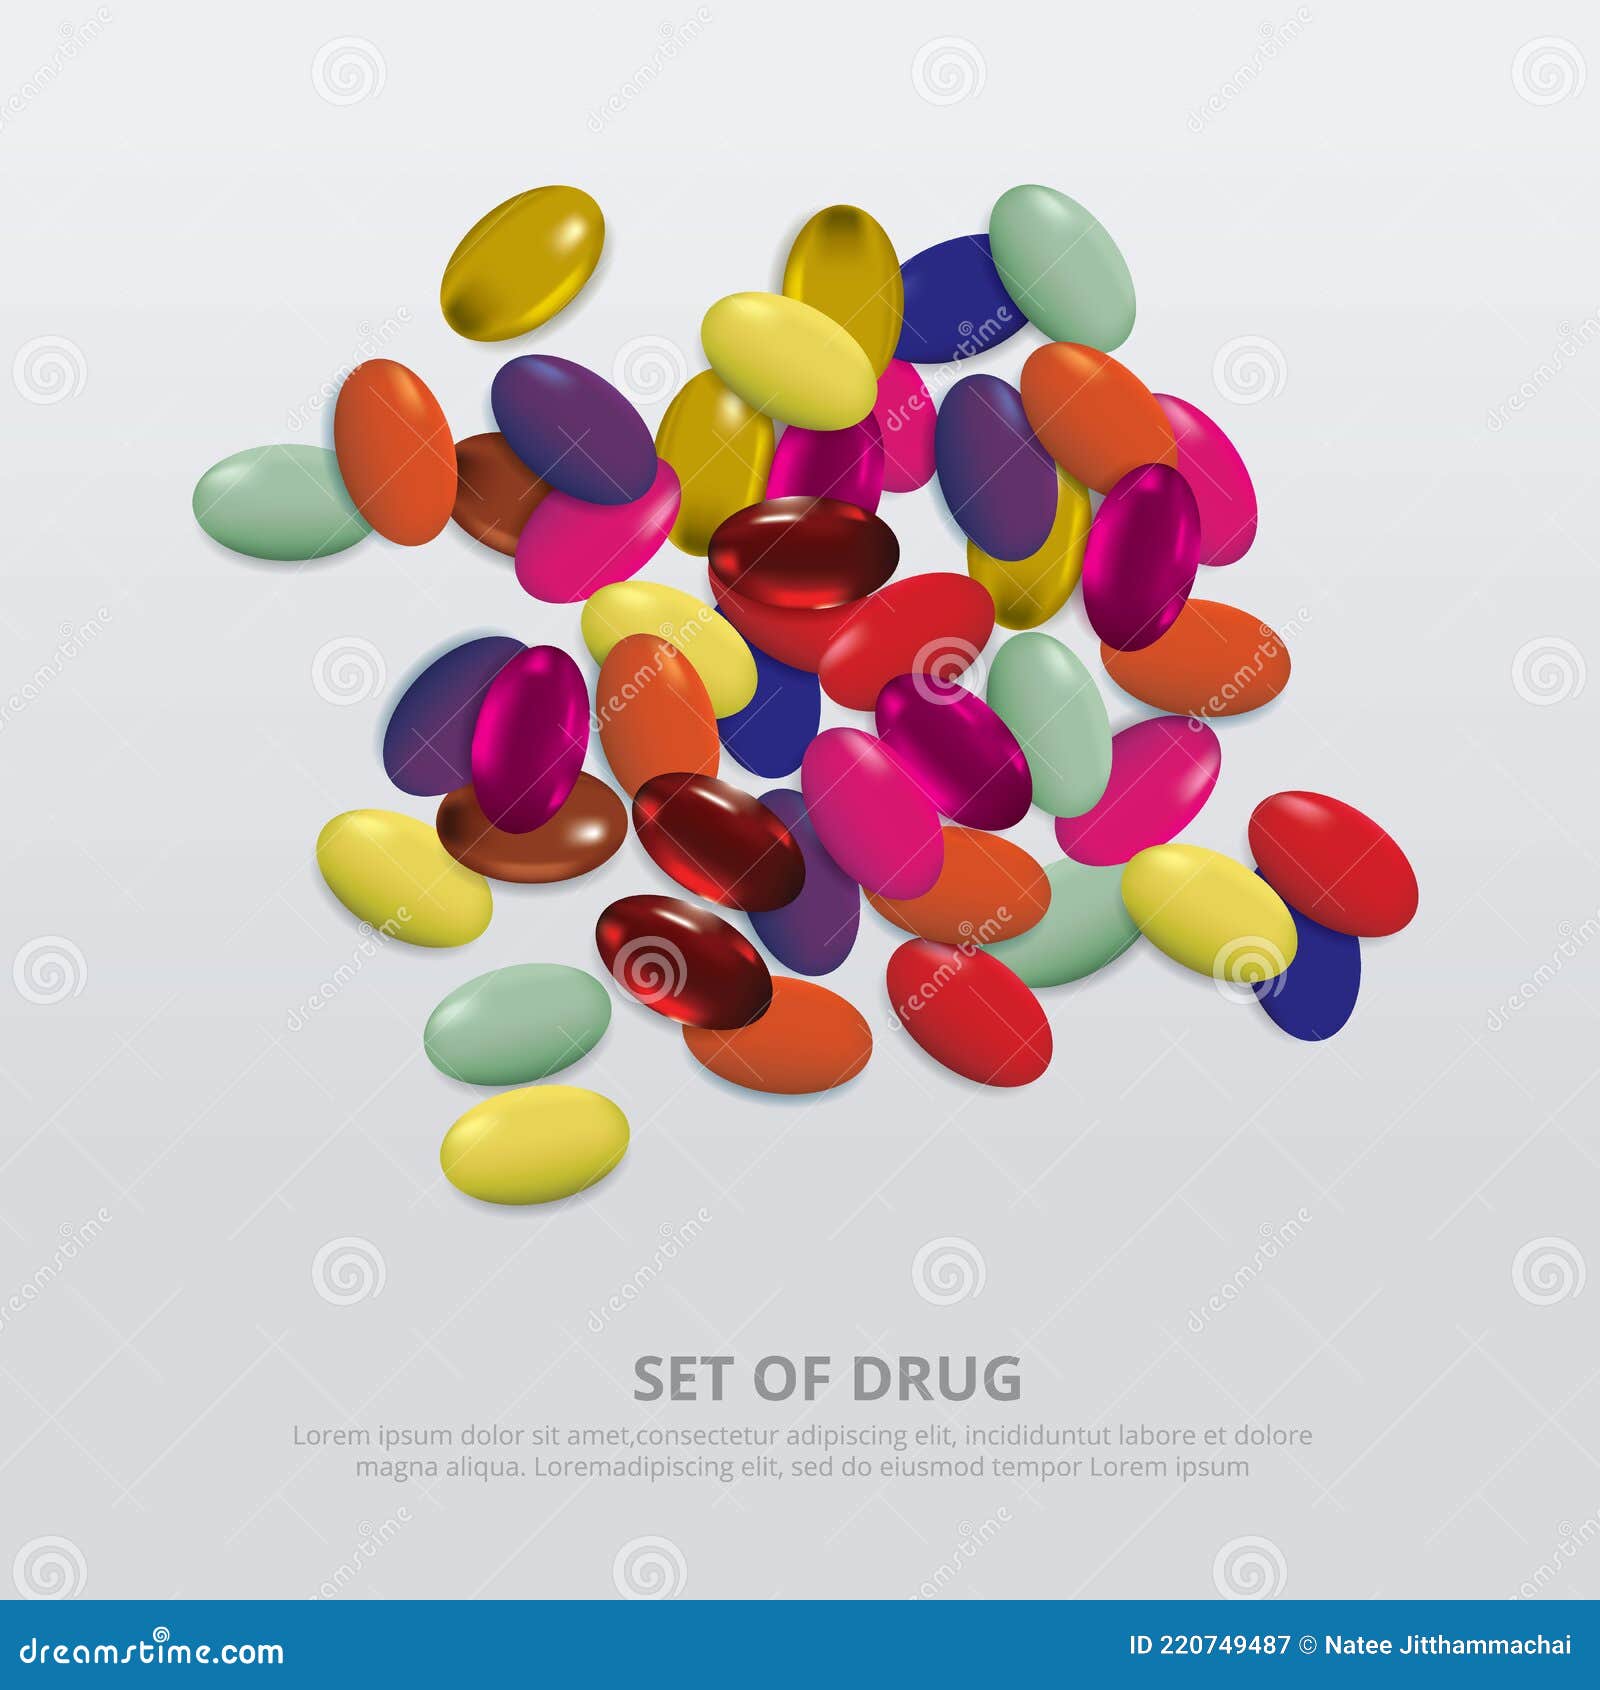 Group of Drug Realistic stock vector. Illustration of mock - 220749487